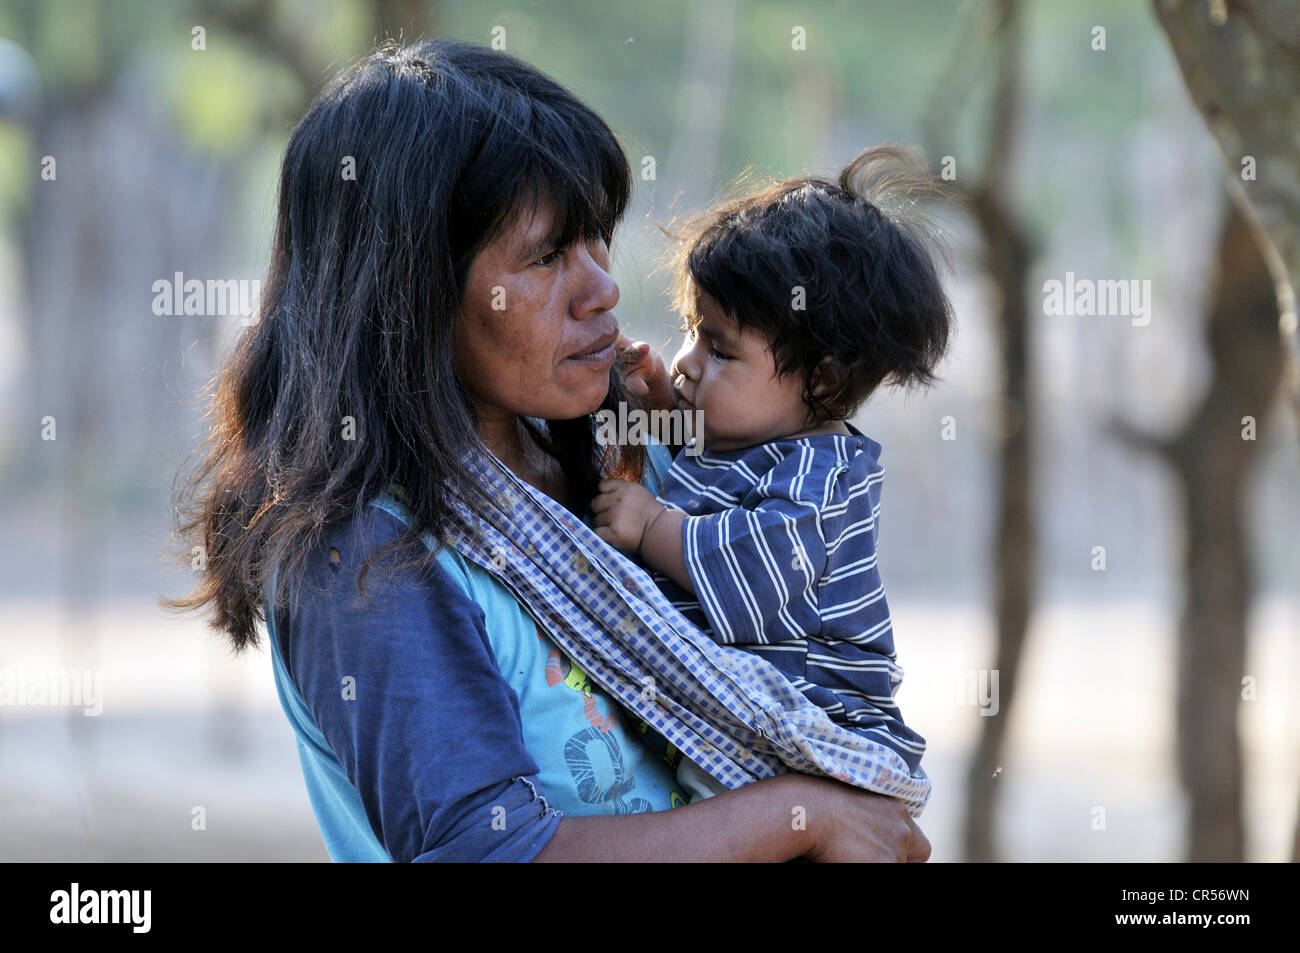 Indigenous mother and child, indigenous community of Zapota, Gran Chaco, Salta, Argentina, South America Stock Photo